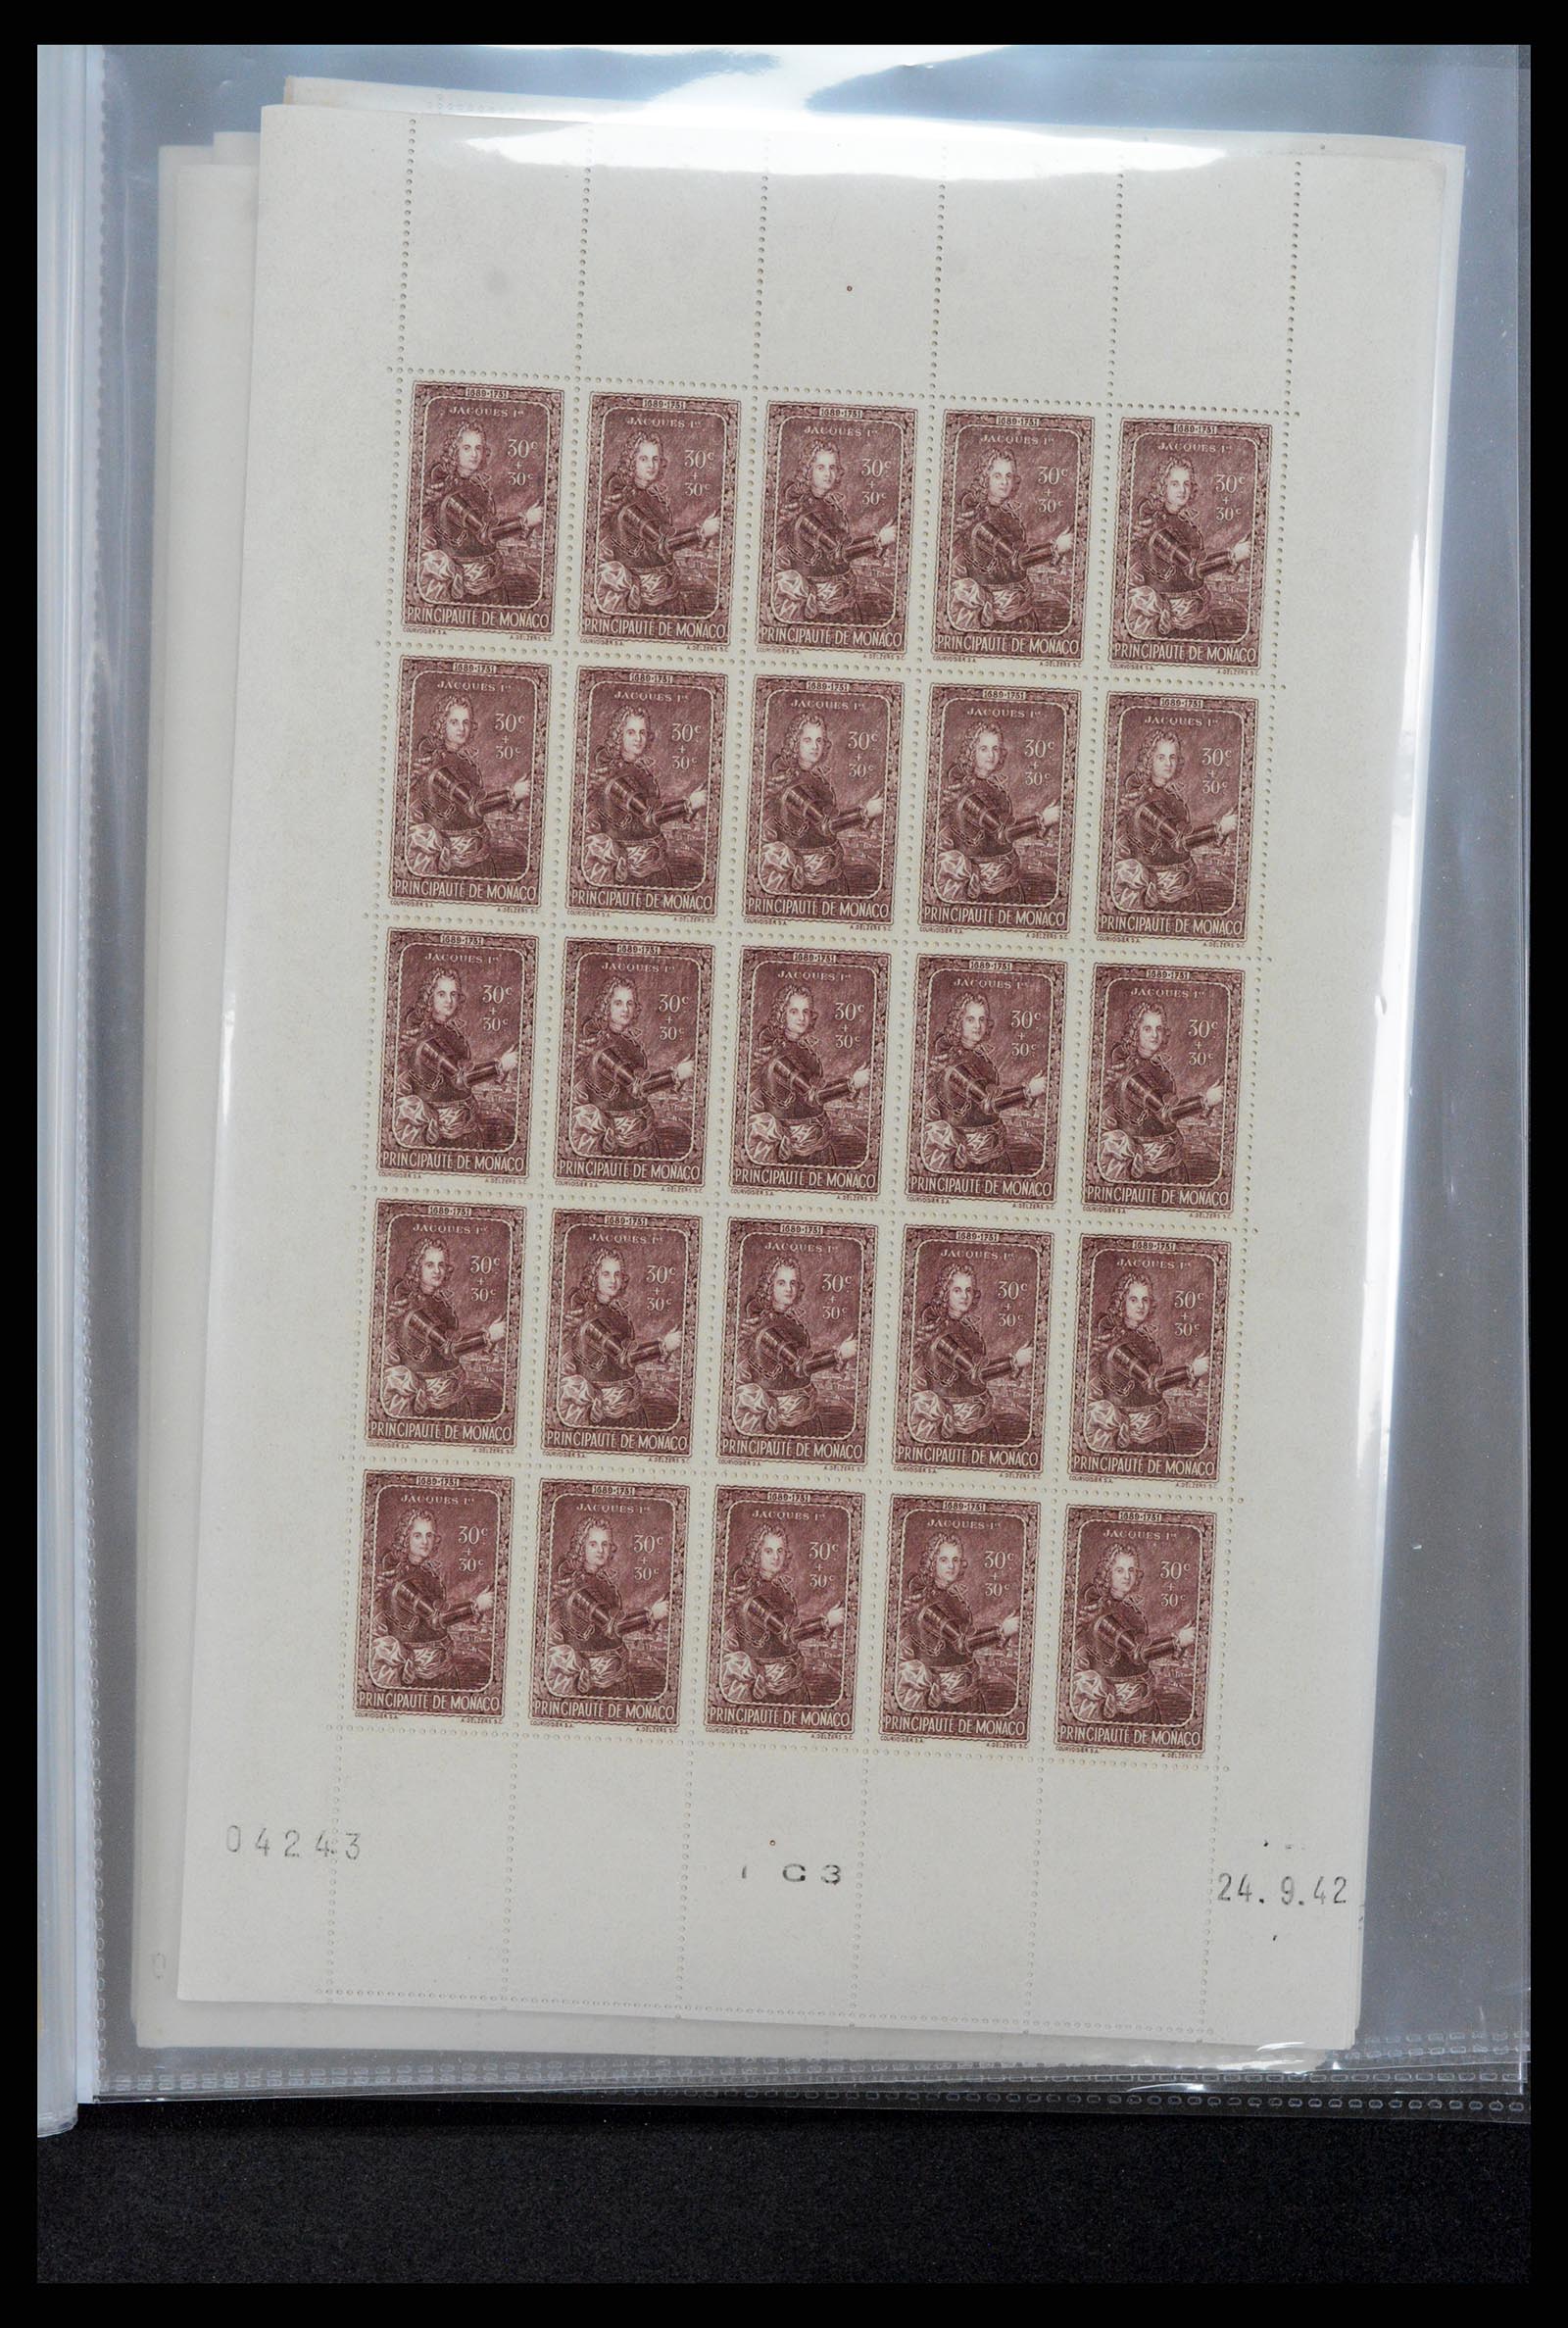 37984 028 - Stamp collection 37984 Monaco better issues 1942-1982.